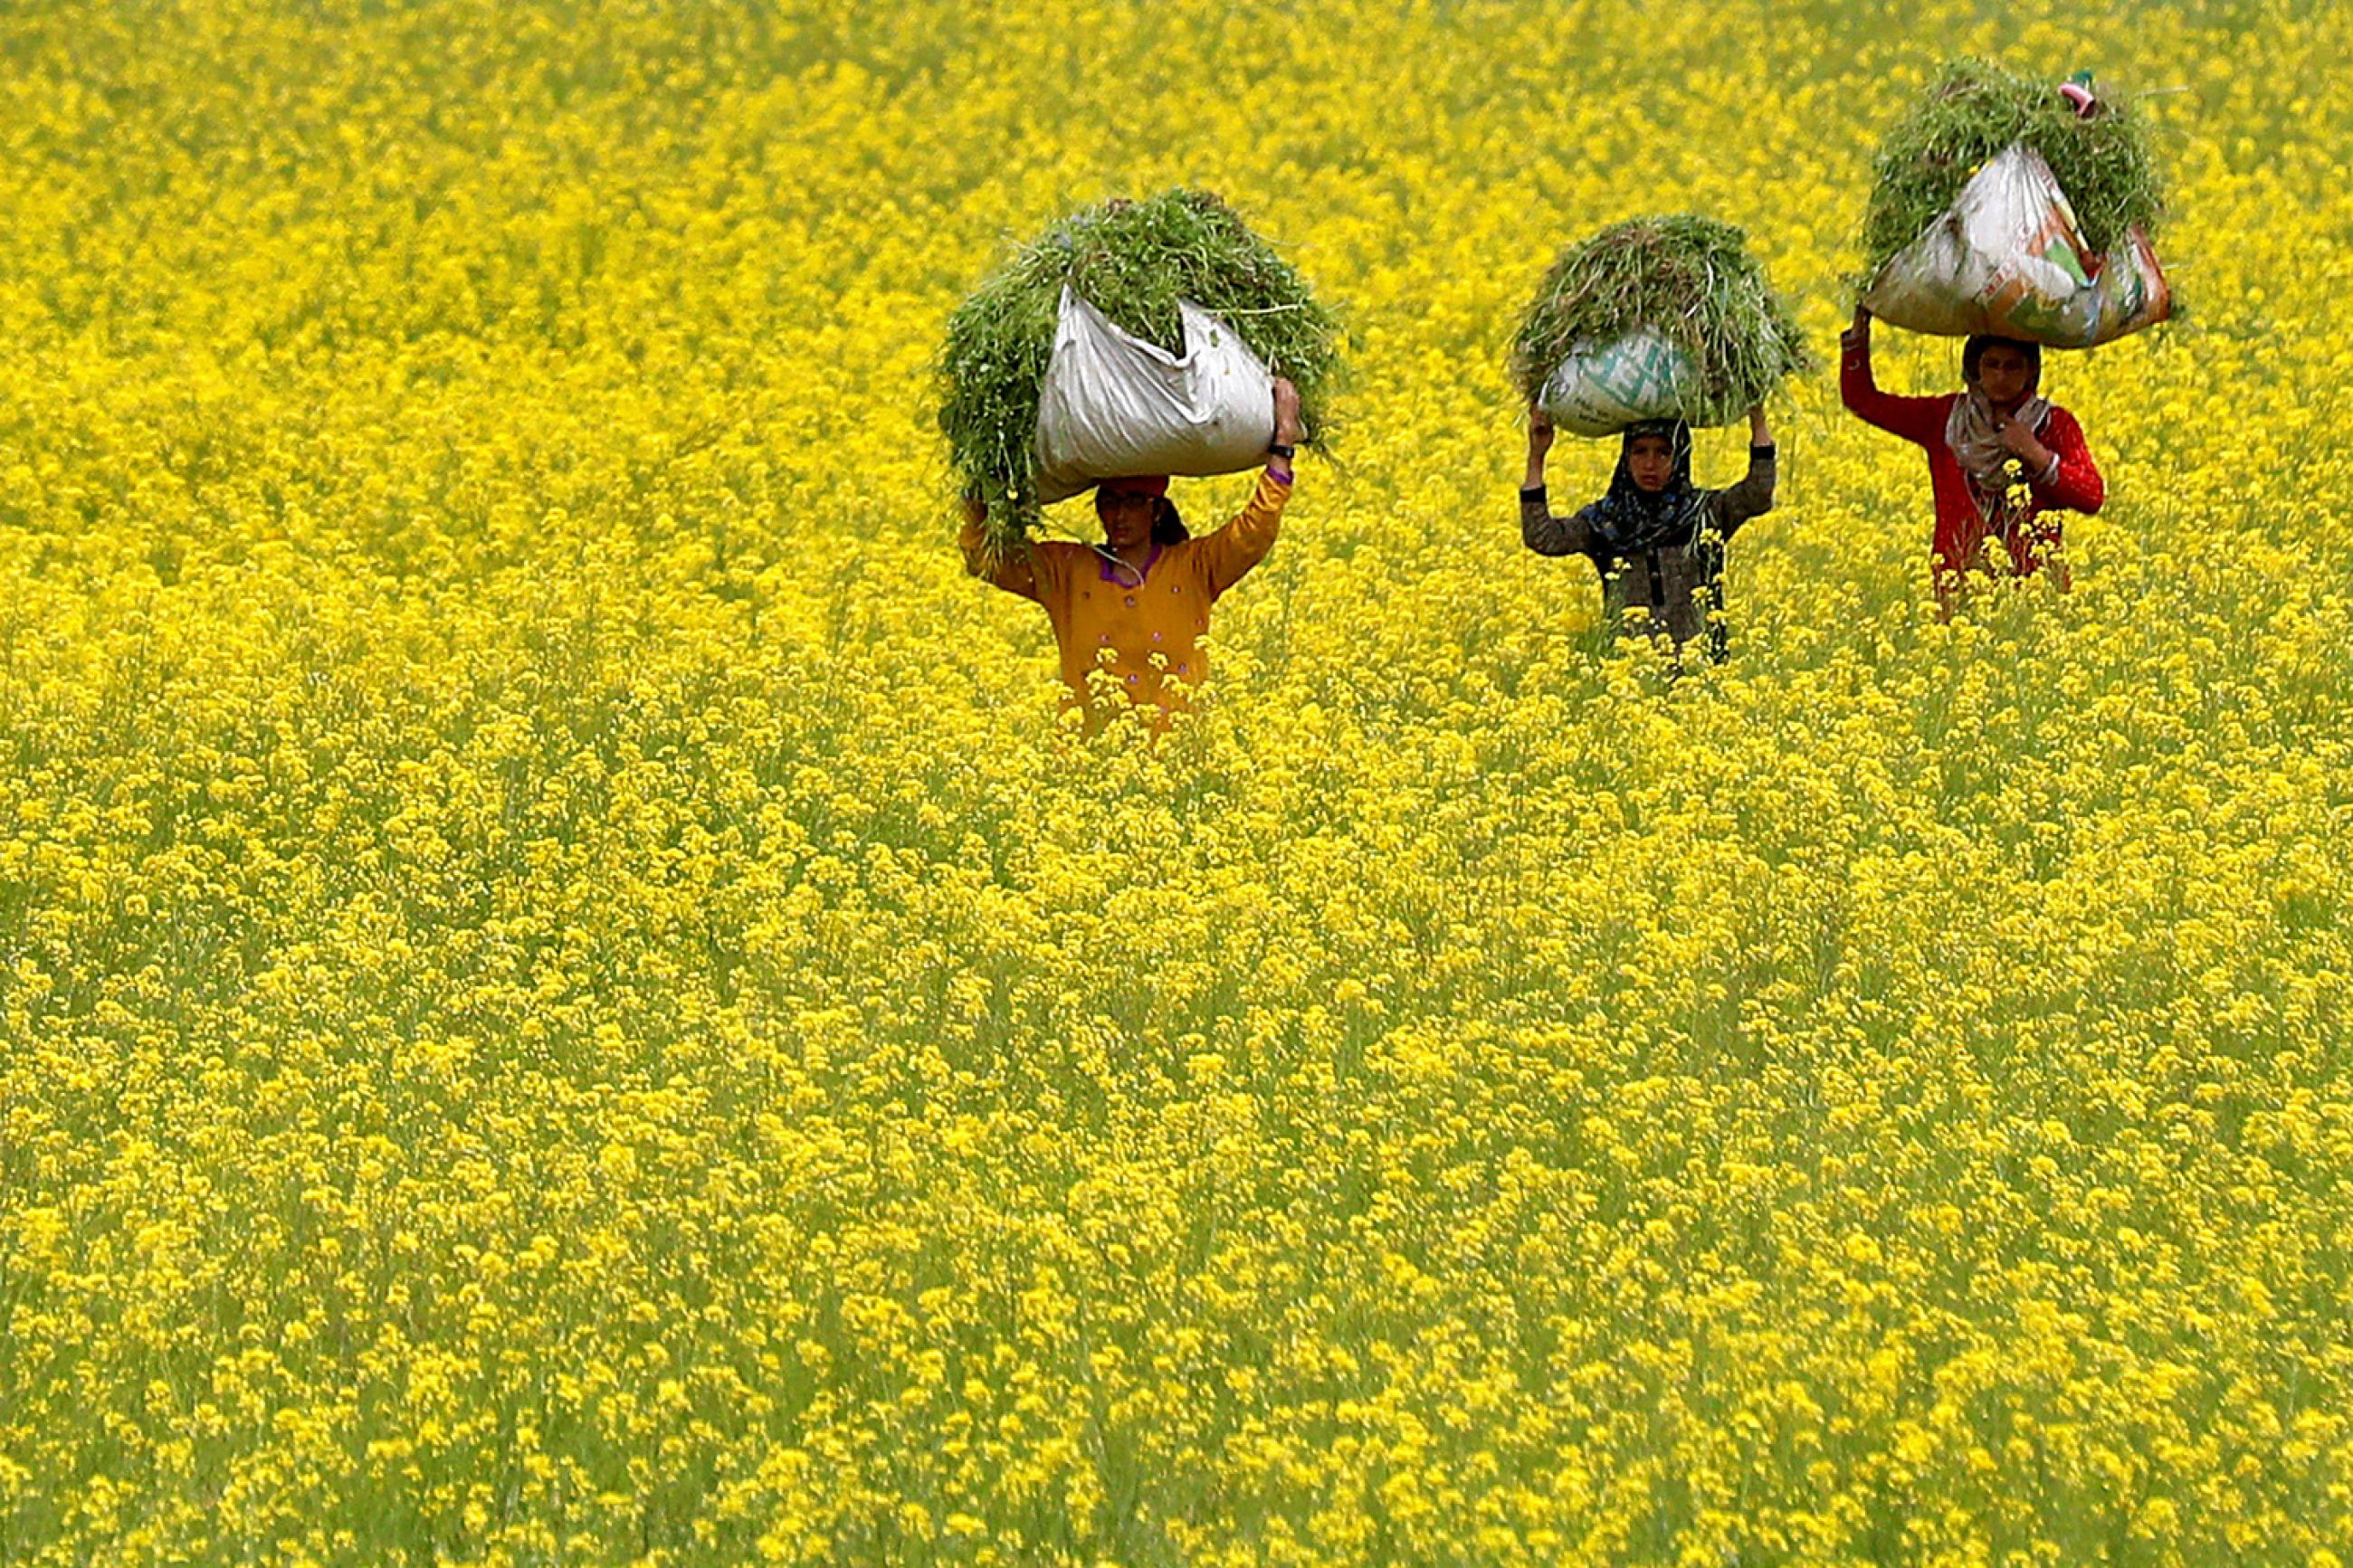 Snapshot from a time when it's far from normal: women carry cattle fodder through a mustard field on Earth Day, amid the coronavirus lockdown, on the outskirts of Srinagar, India, on April 22, 2020. This is a stunning photo showing three women with large bales of freshly cut plants on their heads walking through a field thrown into a yellow hue because of the flowering mustard greens. REUTERS/Danish Ismail